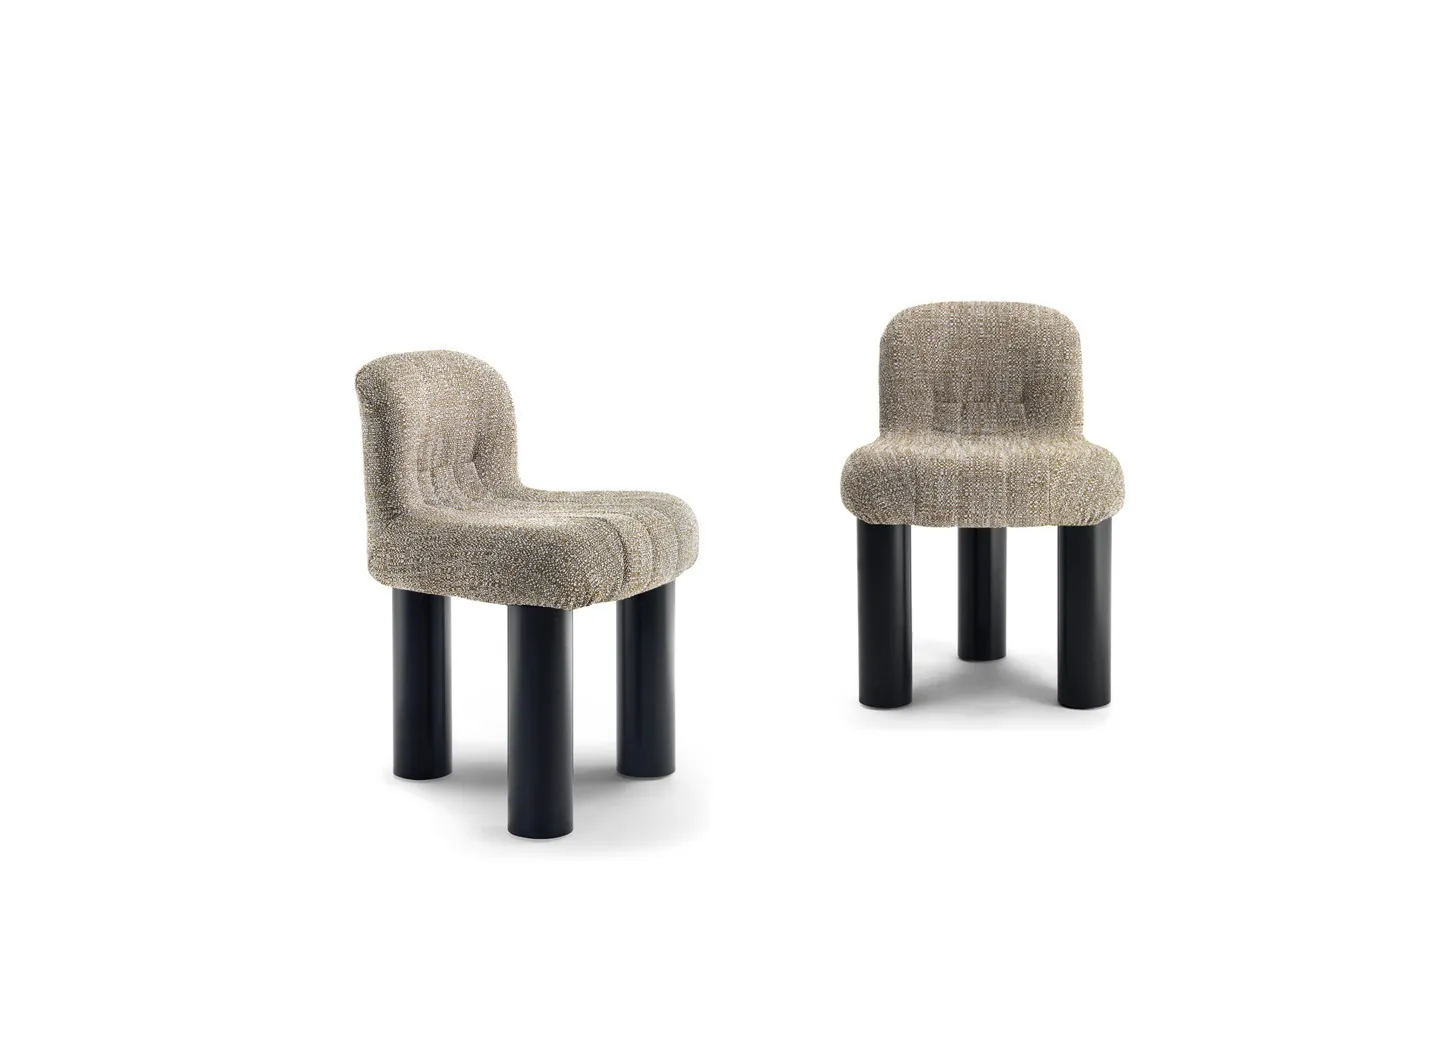 Botolo armchair - High version and low version